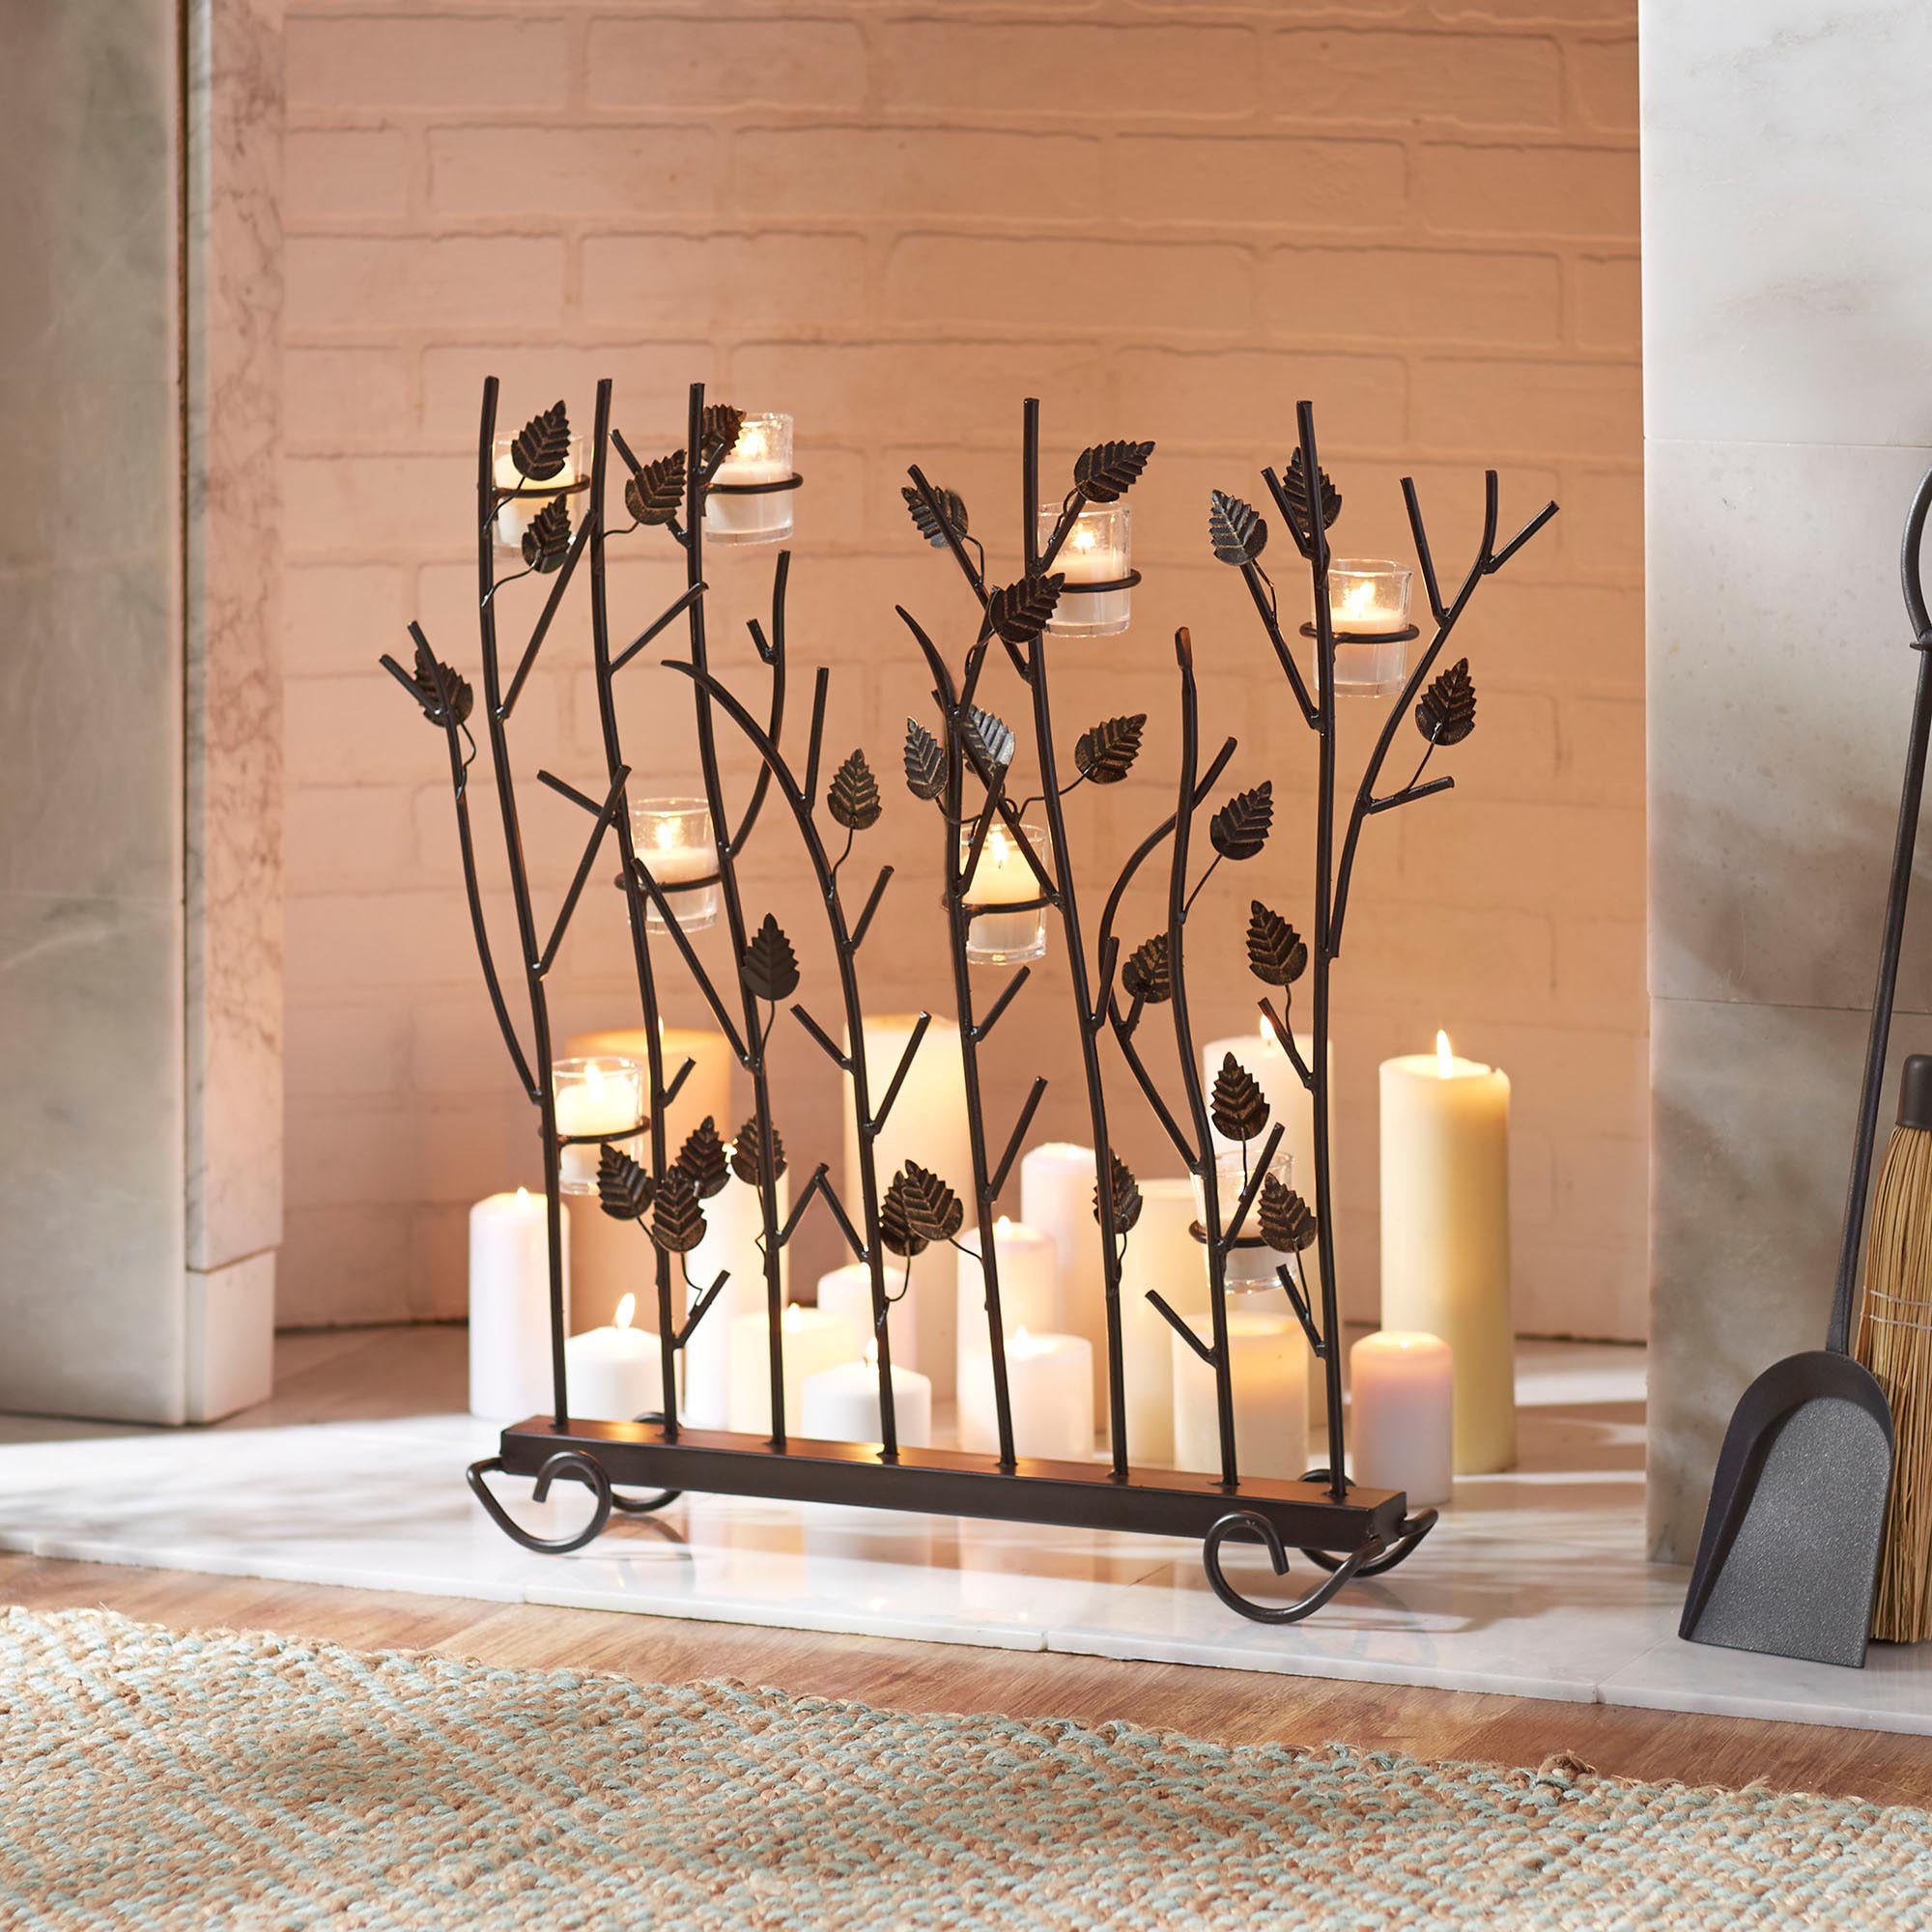 Wrought Iron Candle Holders for Fireplace